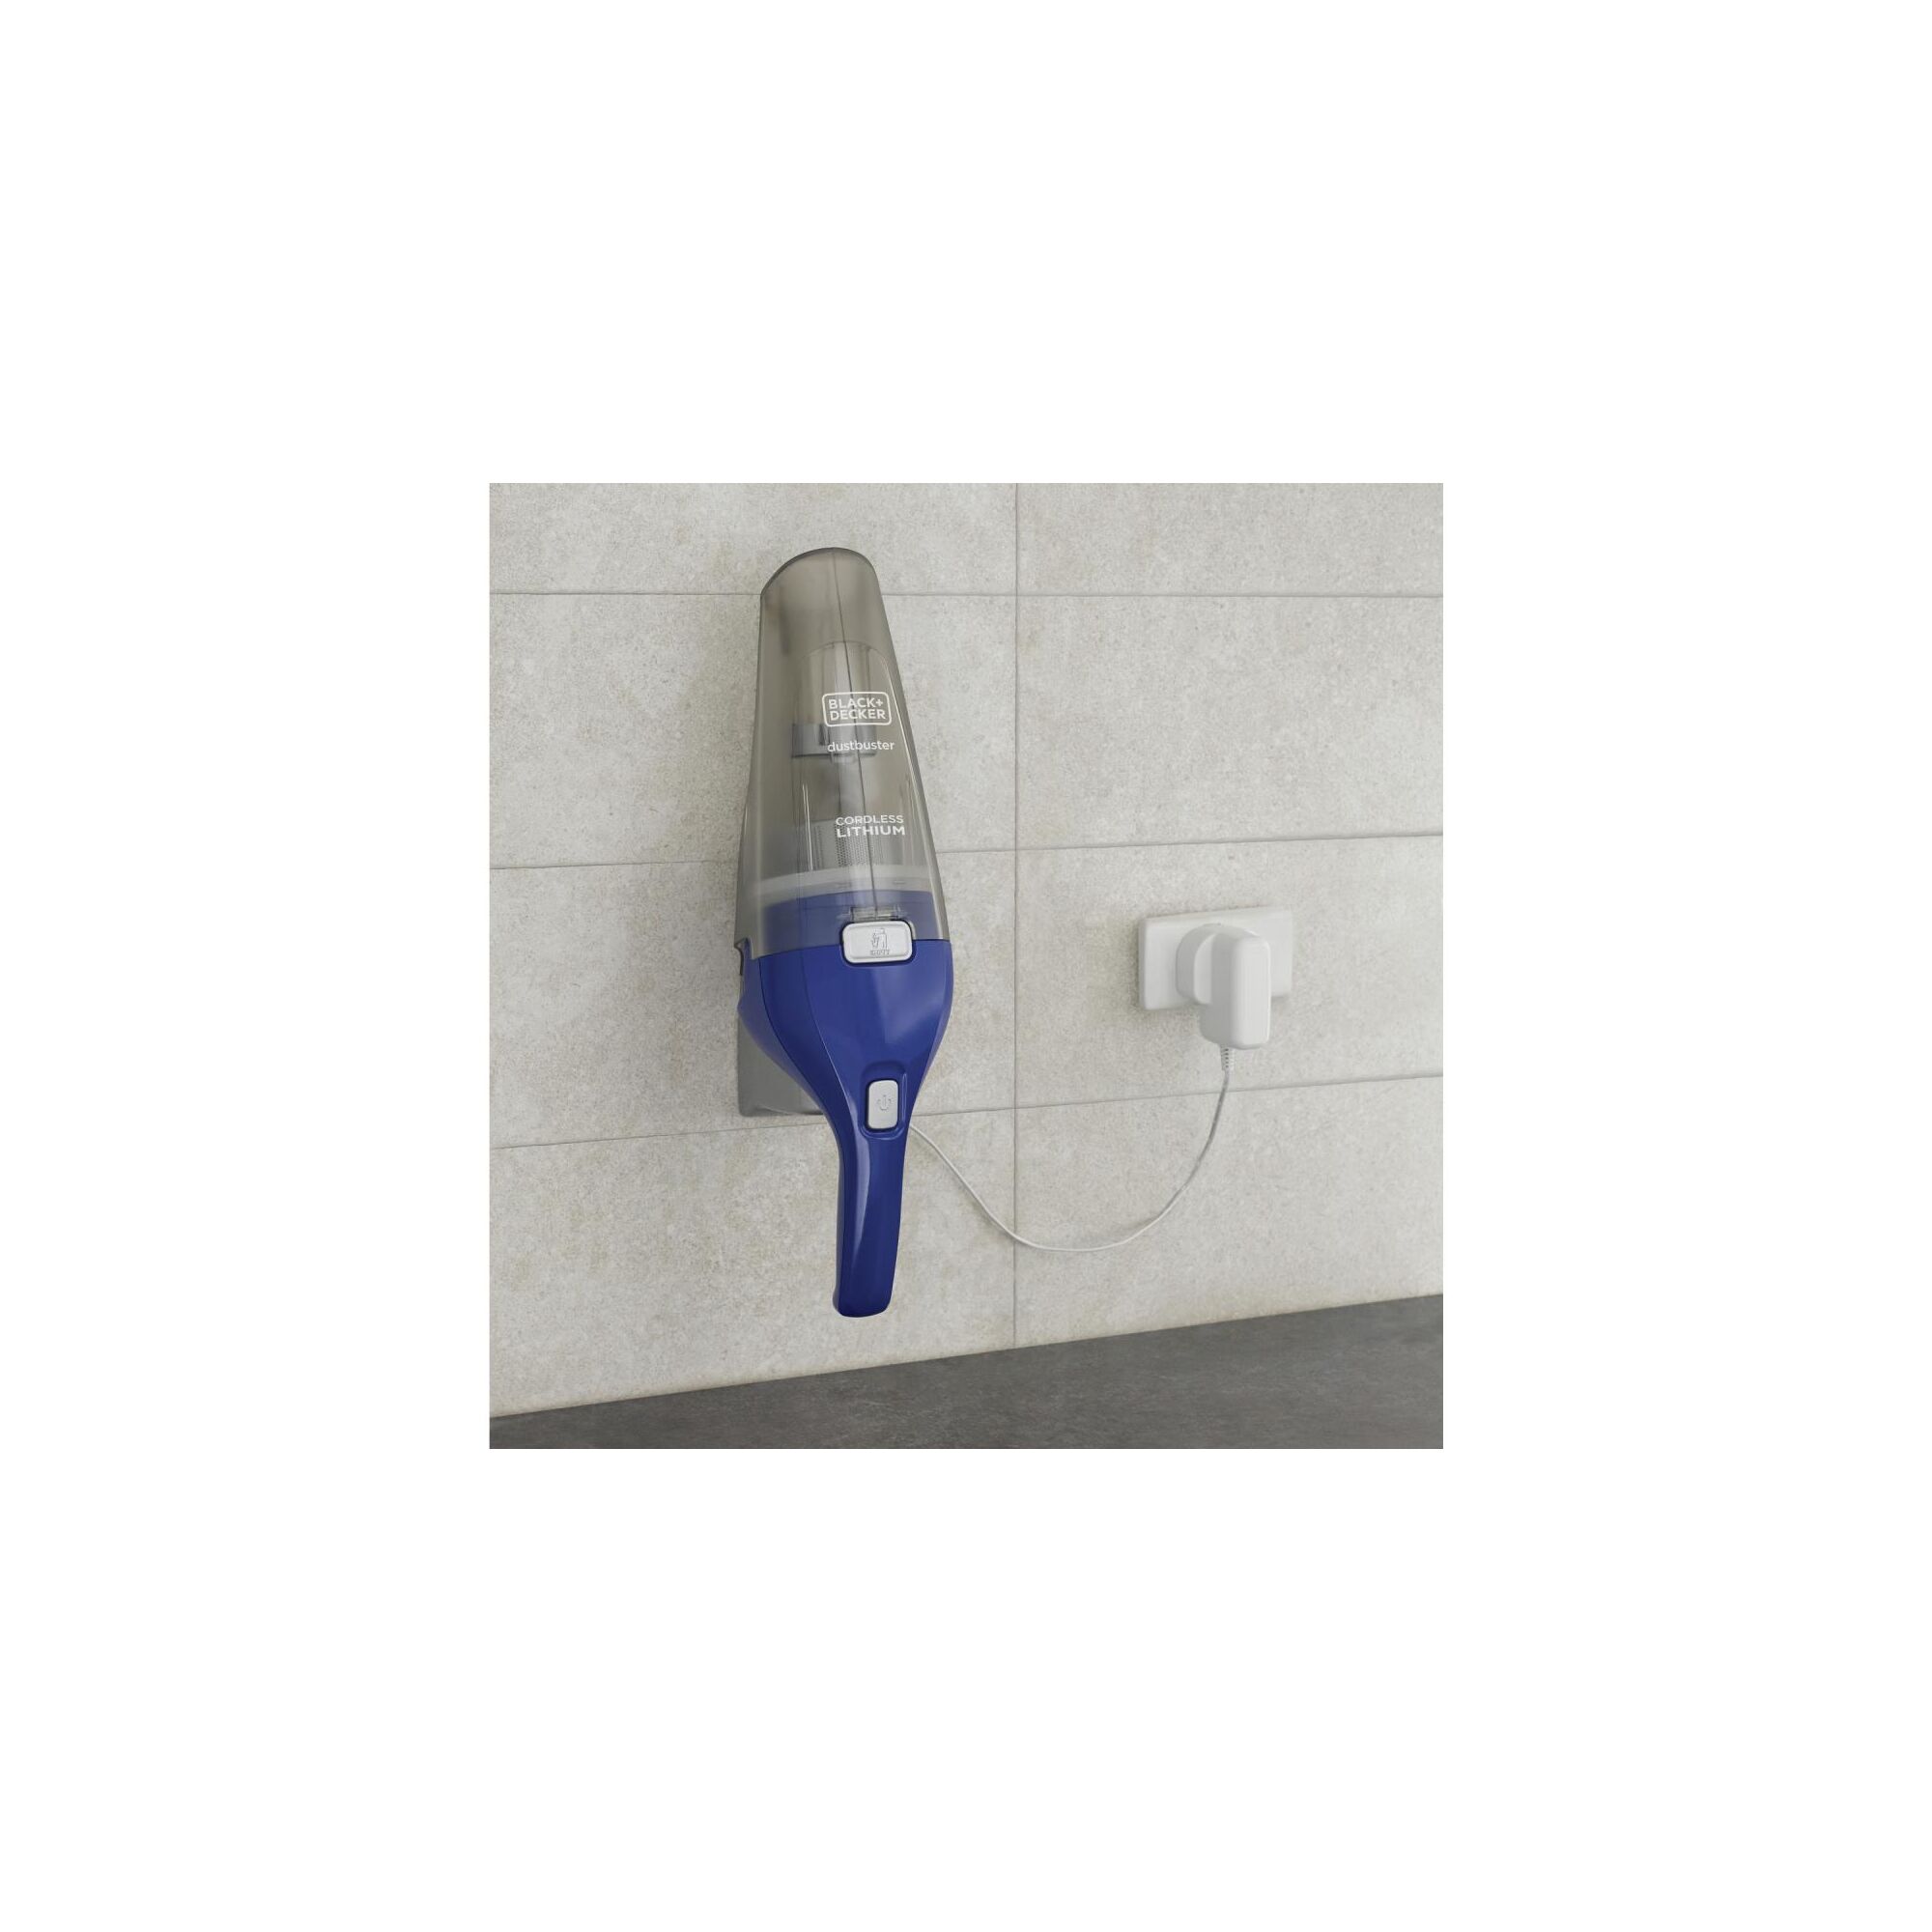 Wall mount and charger for the BLACK+DECKER dustbuster handheld vacuum